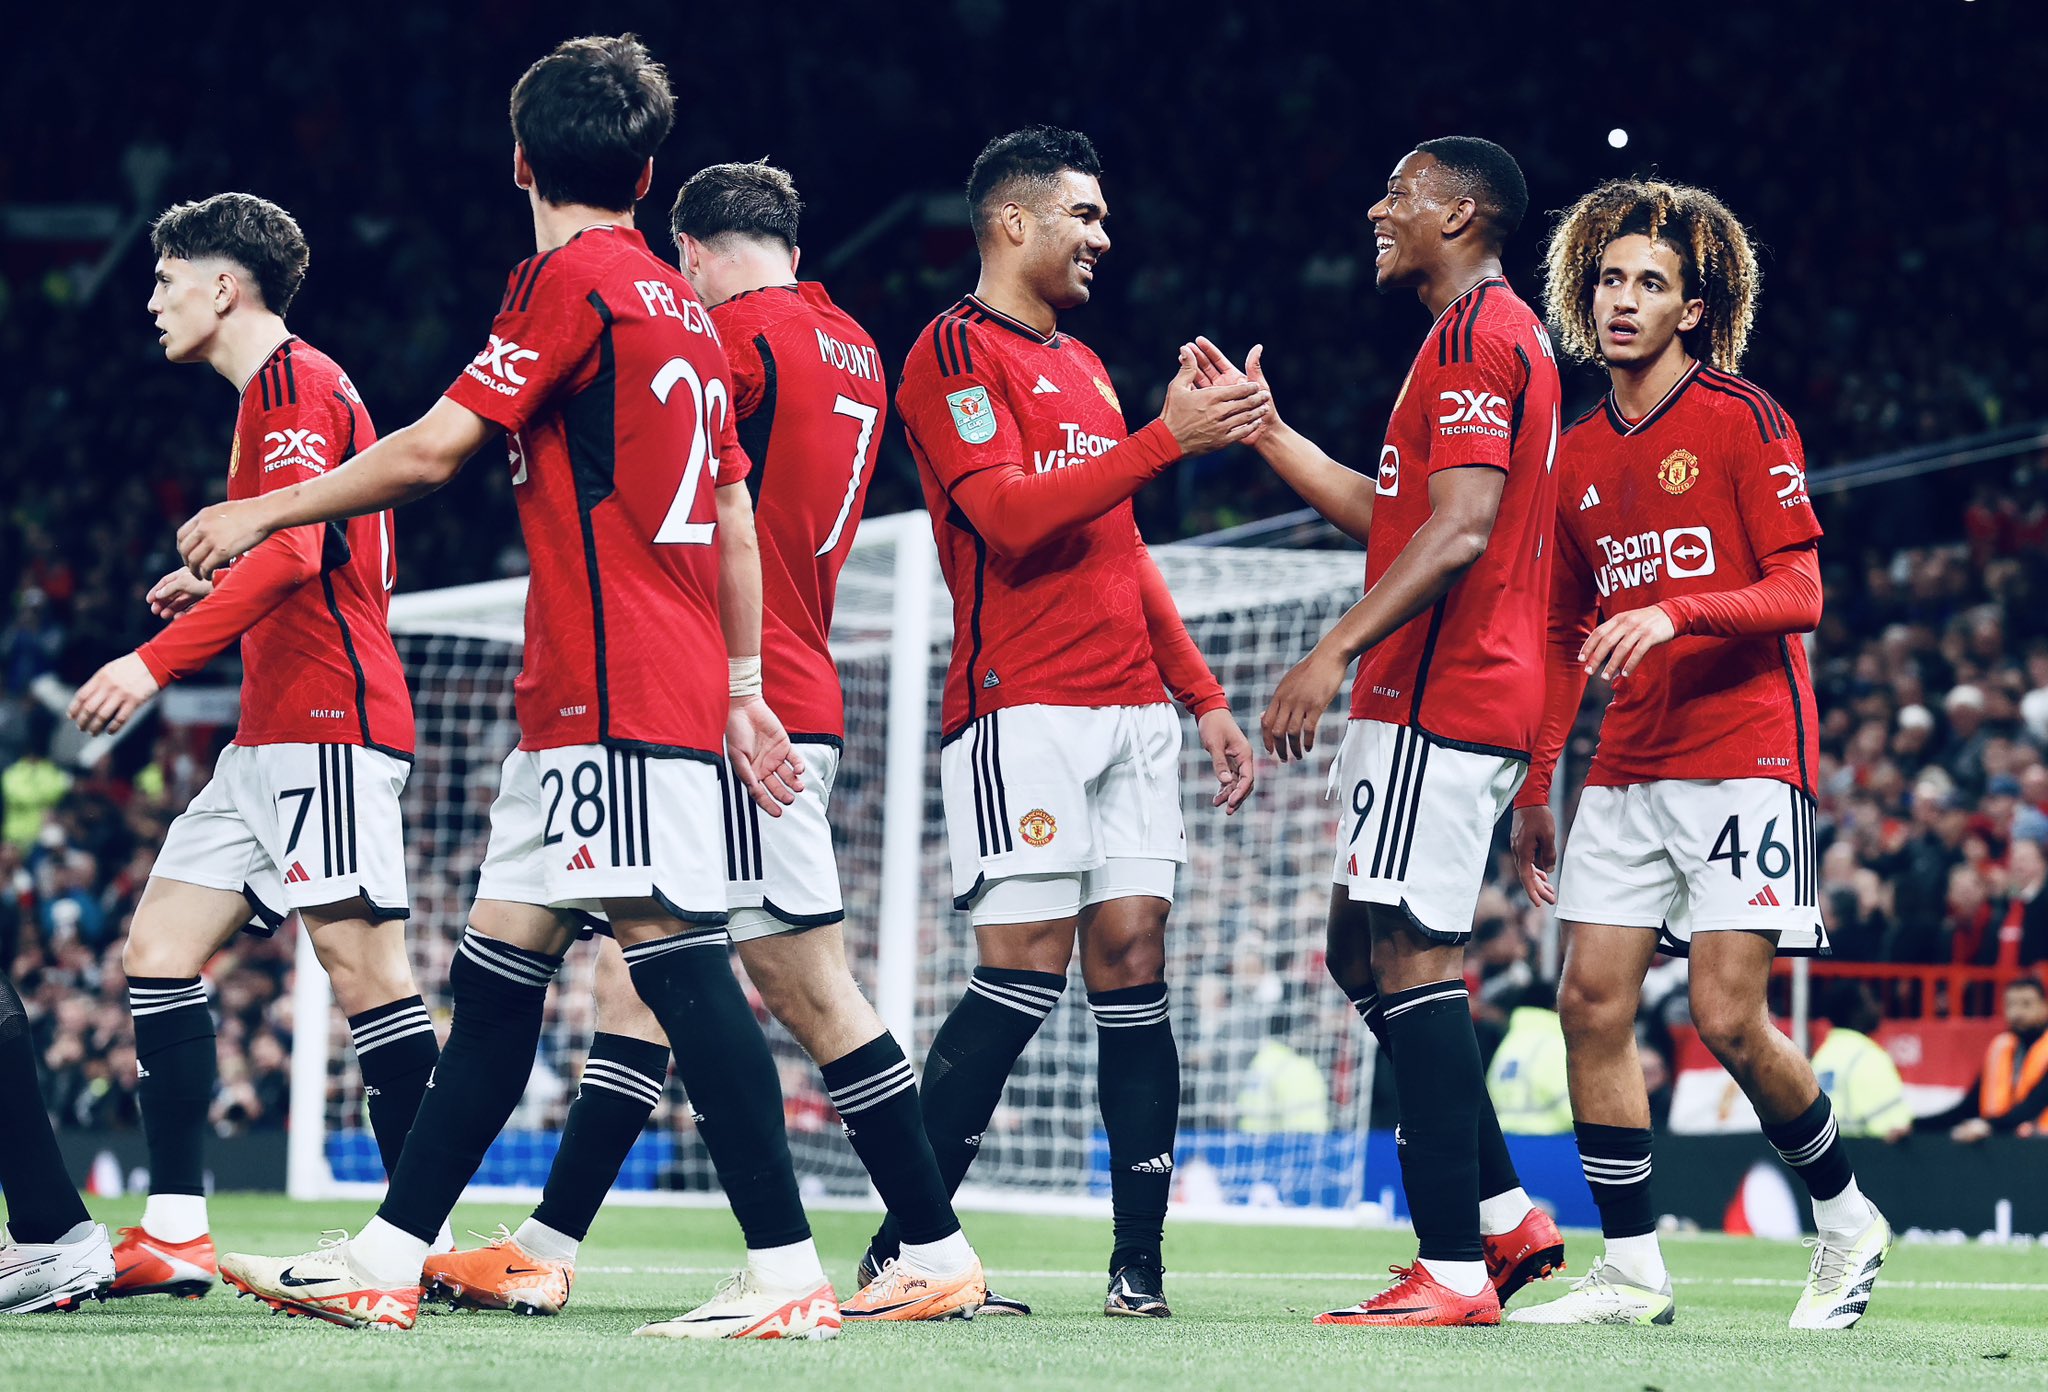 Manchester United 3 - 0 Crystal Palace